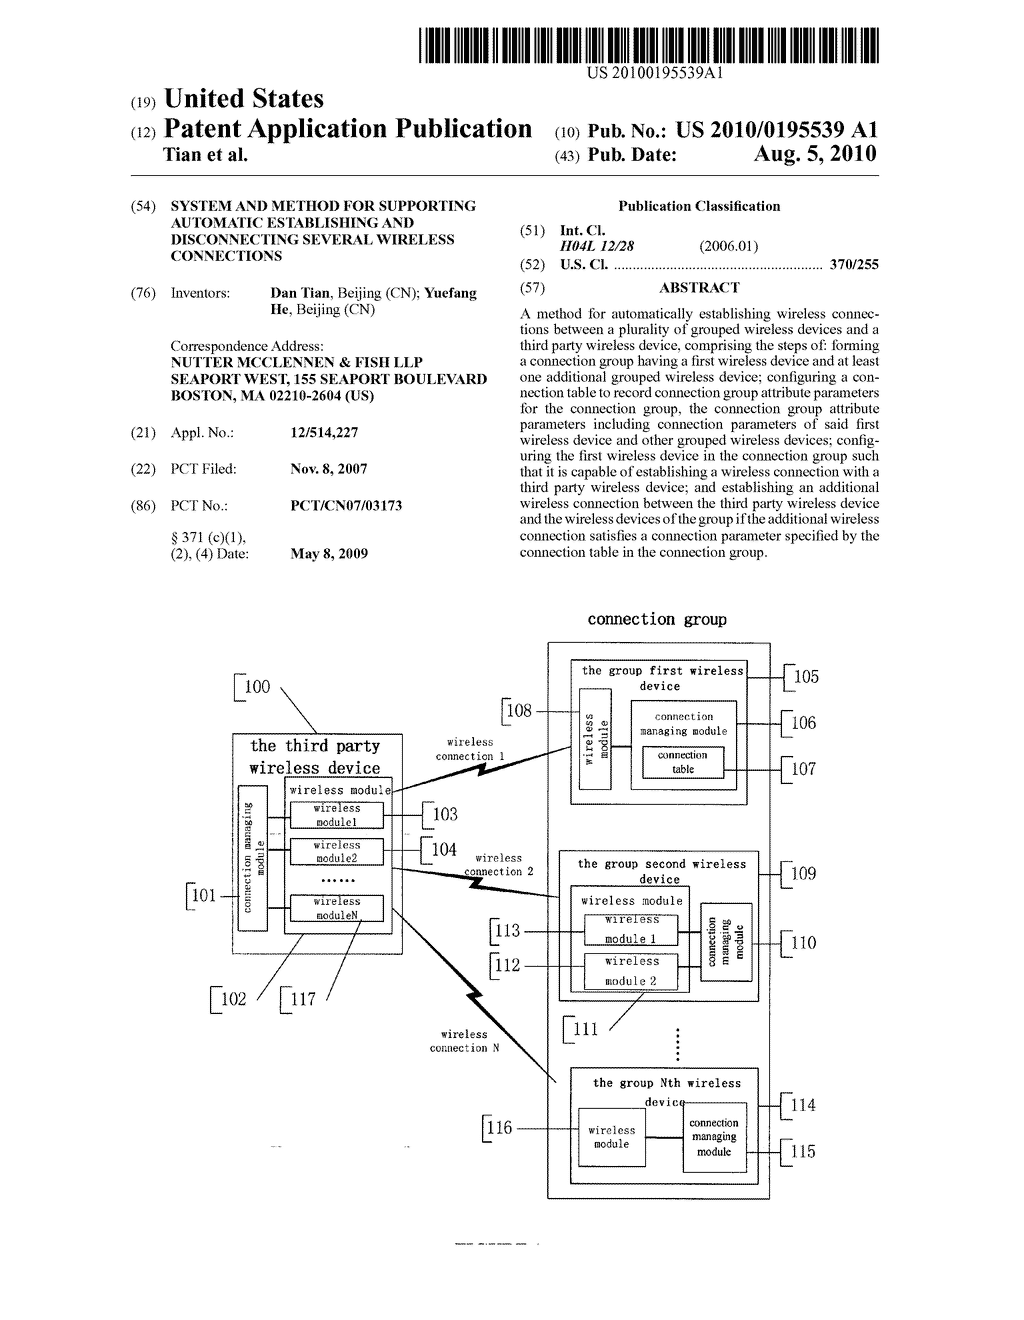 SYSTEM AND METHOD FOR SUPPORTING AUTOMATIC ESTABLISHING AND DISCONNECTING SEVERAL WIRELESS CONNECTIONS - diagram, schematic, and image 01